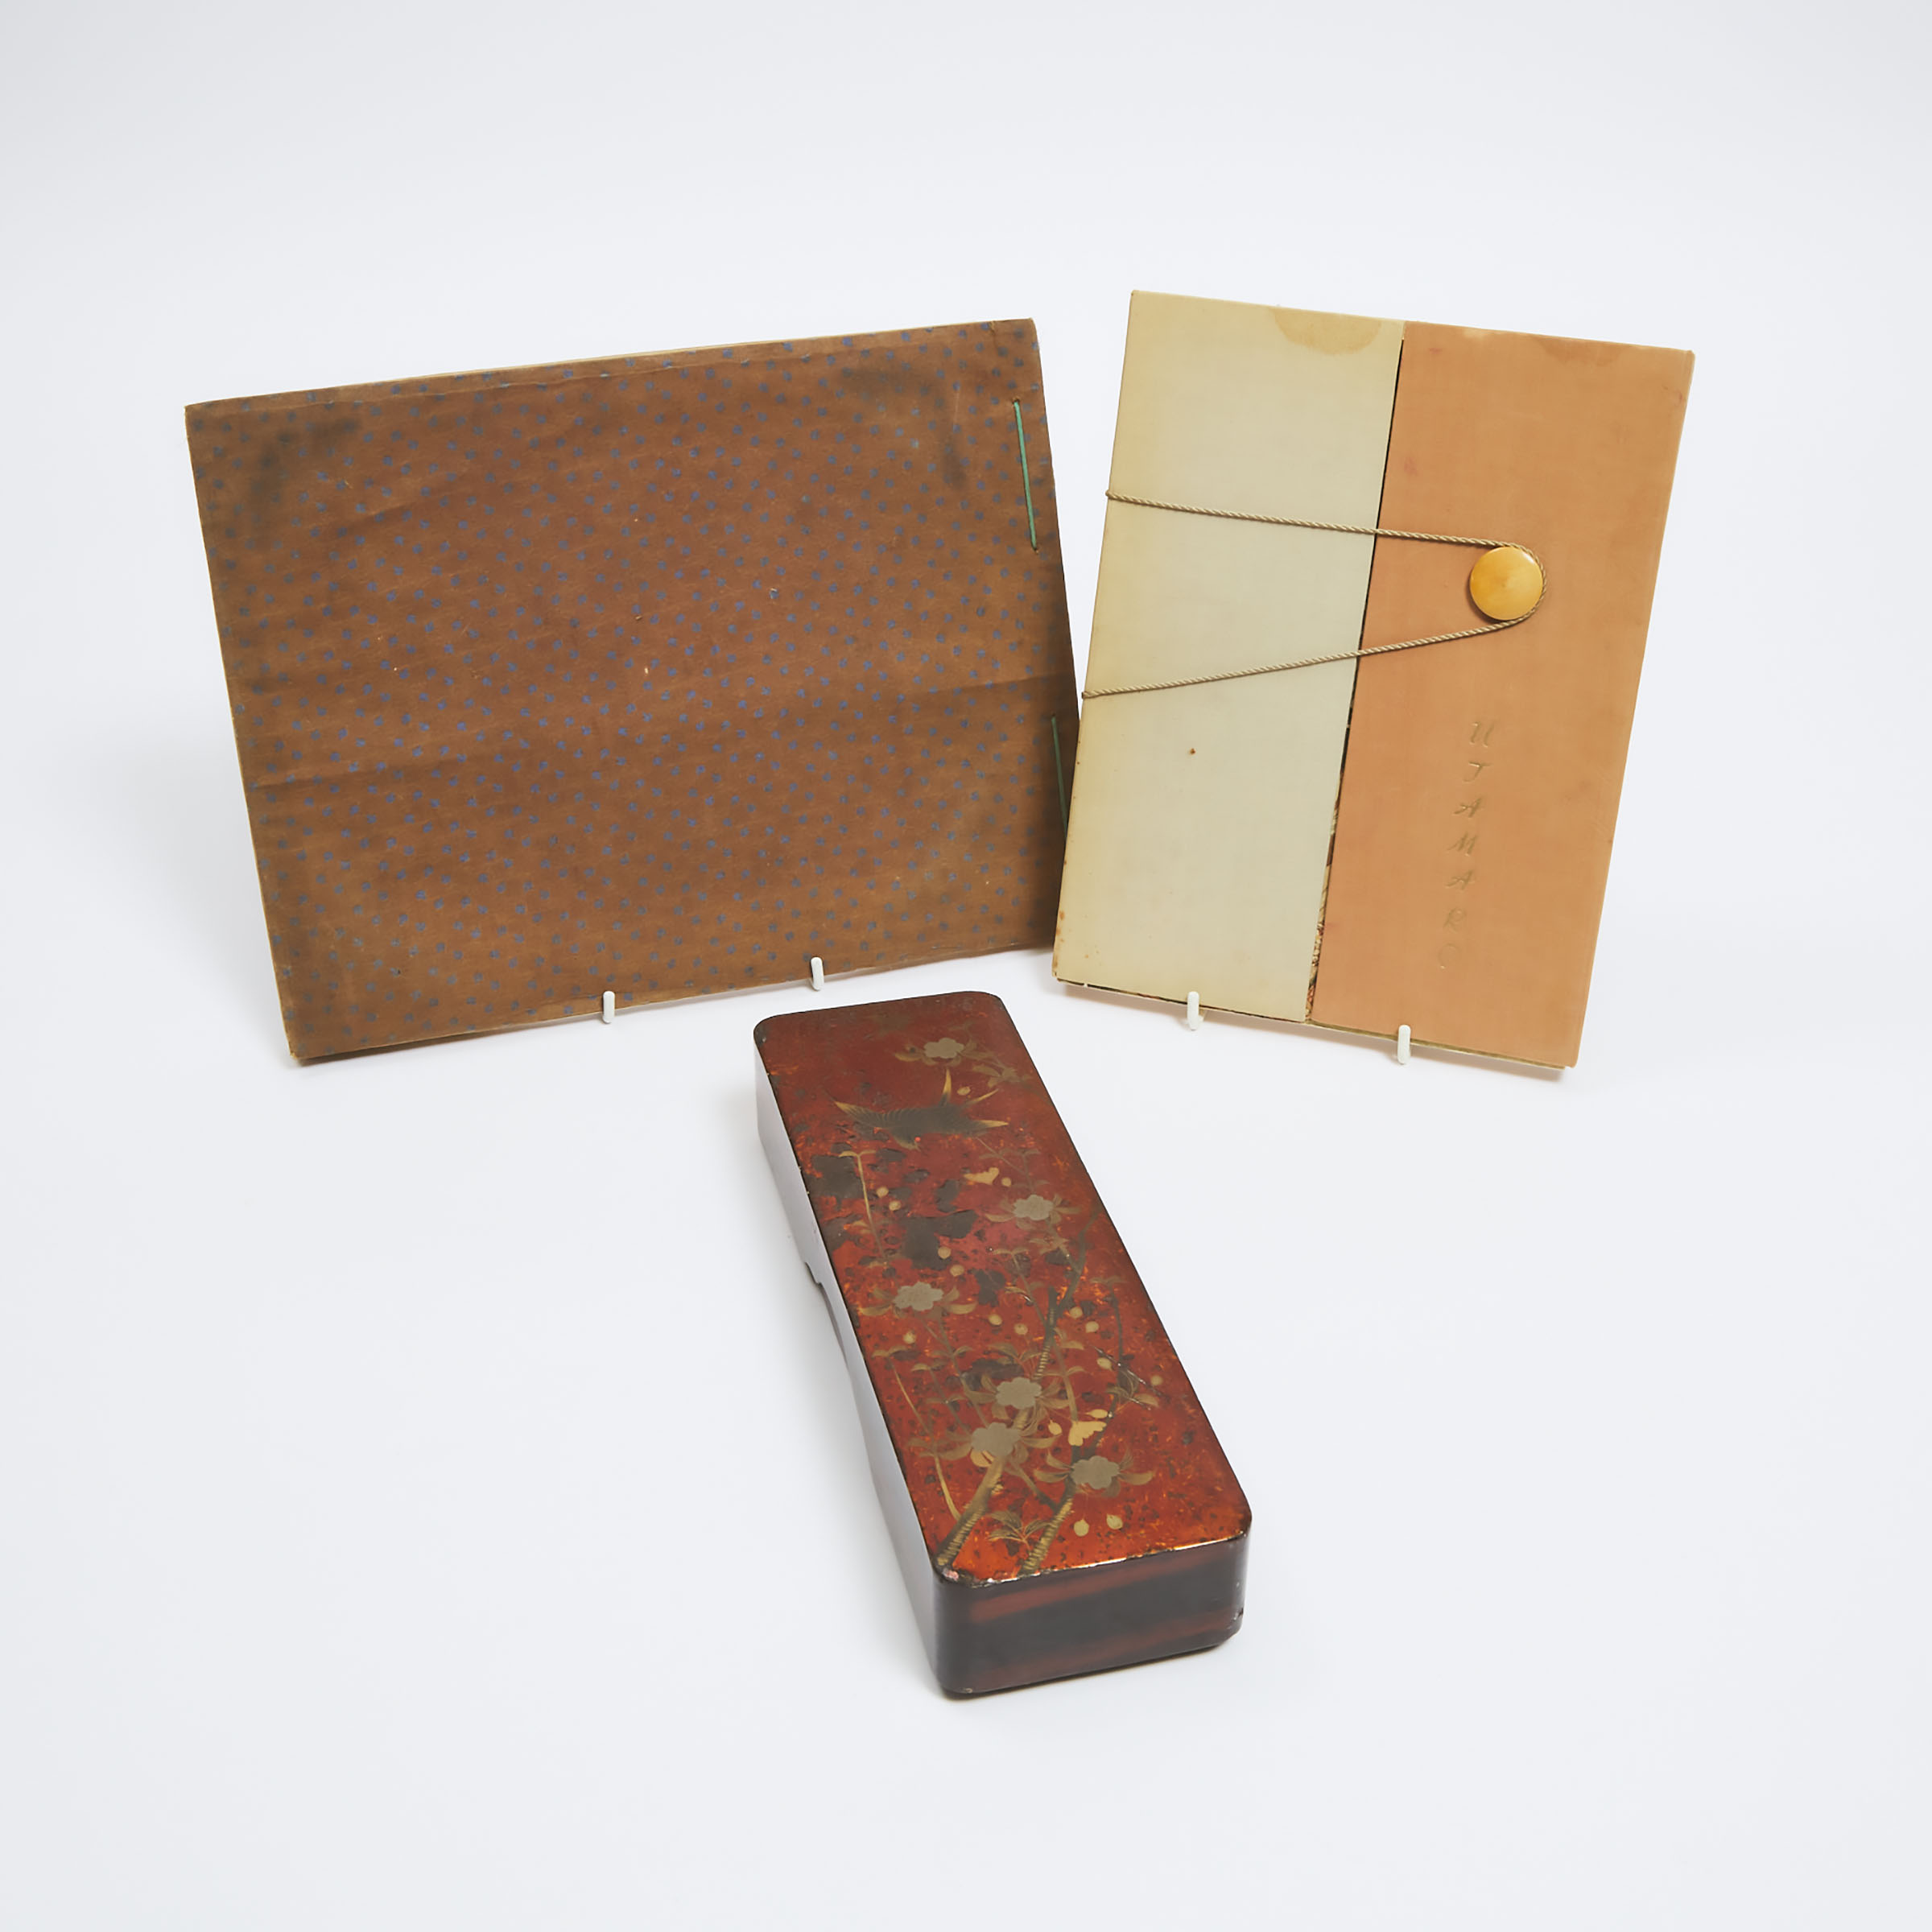 A Japanese Gilt and Lacquered 'Swallow and Cherry Blossom' Box, Meiji Period, Together With a Clothbound Photo Album and Utamaro Woodblock Reference Book